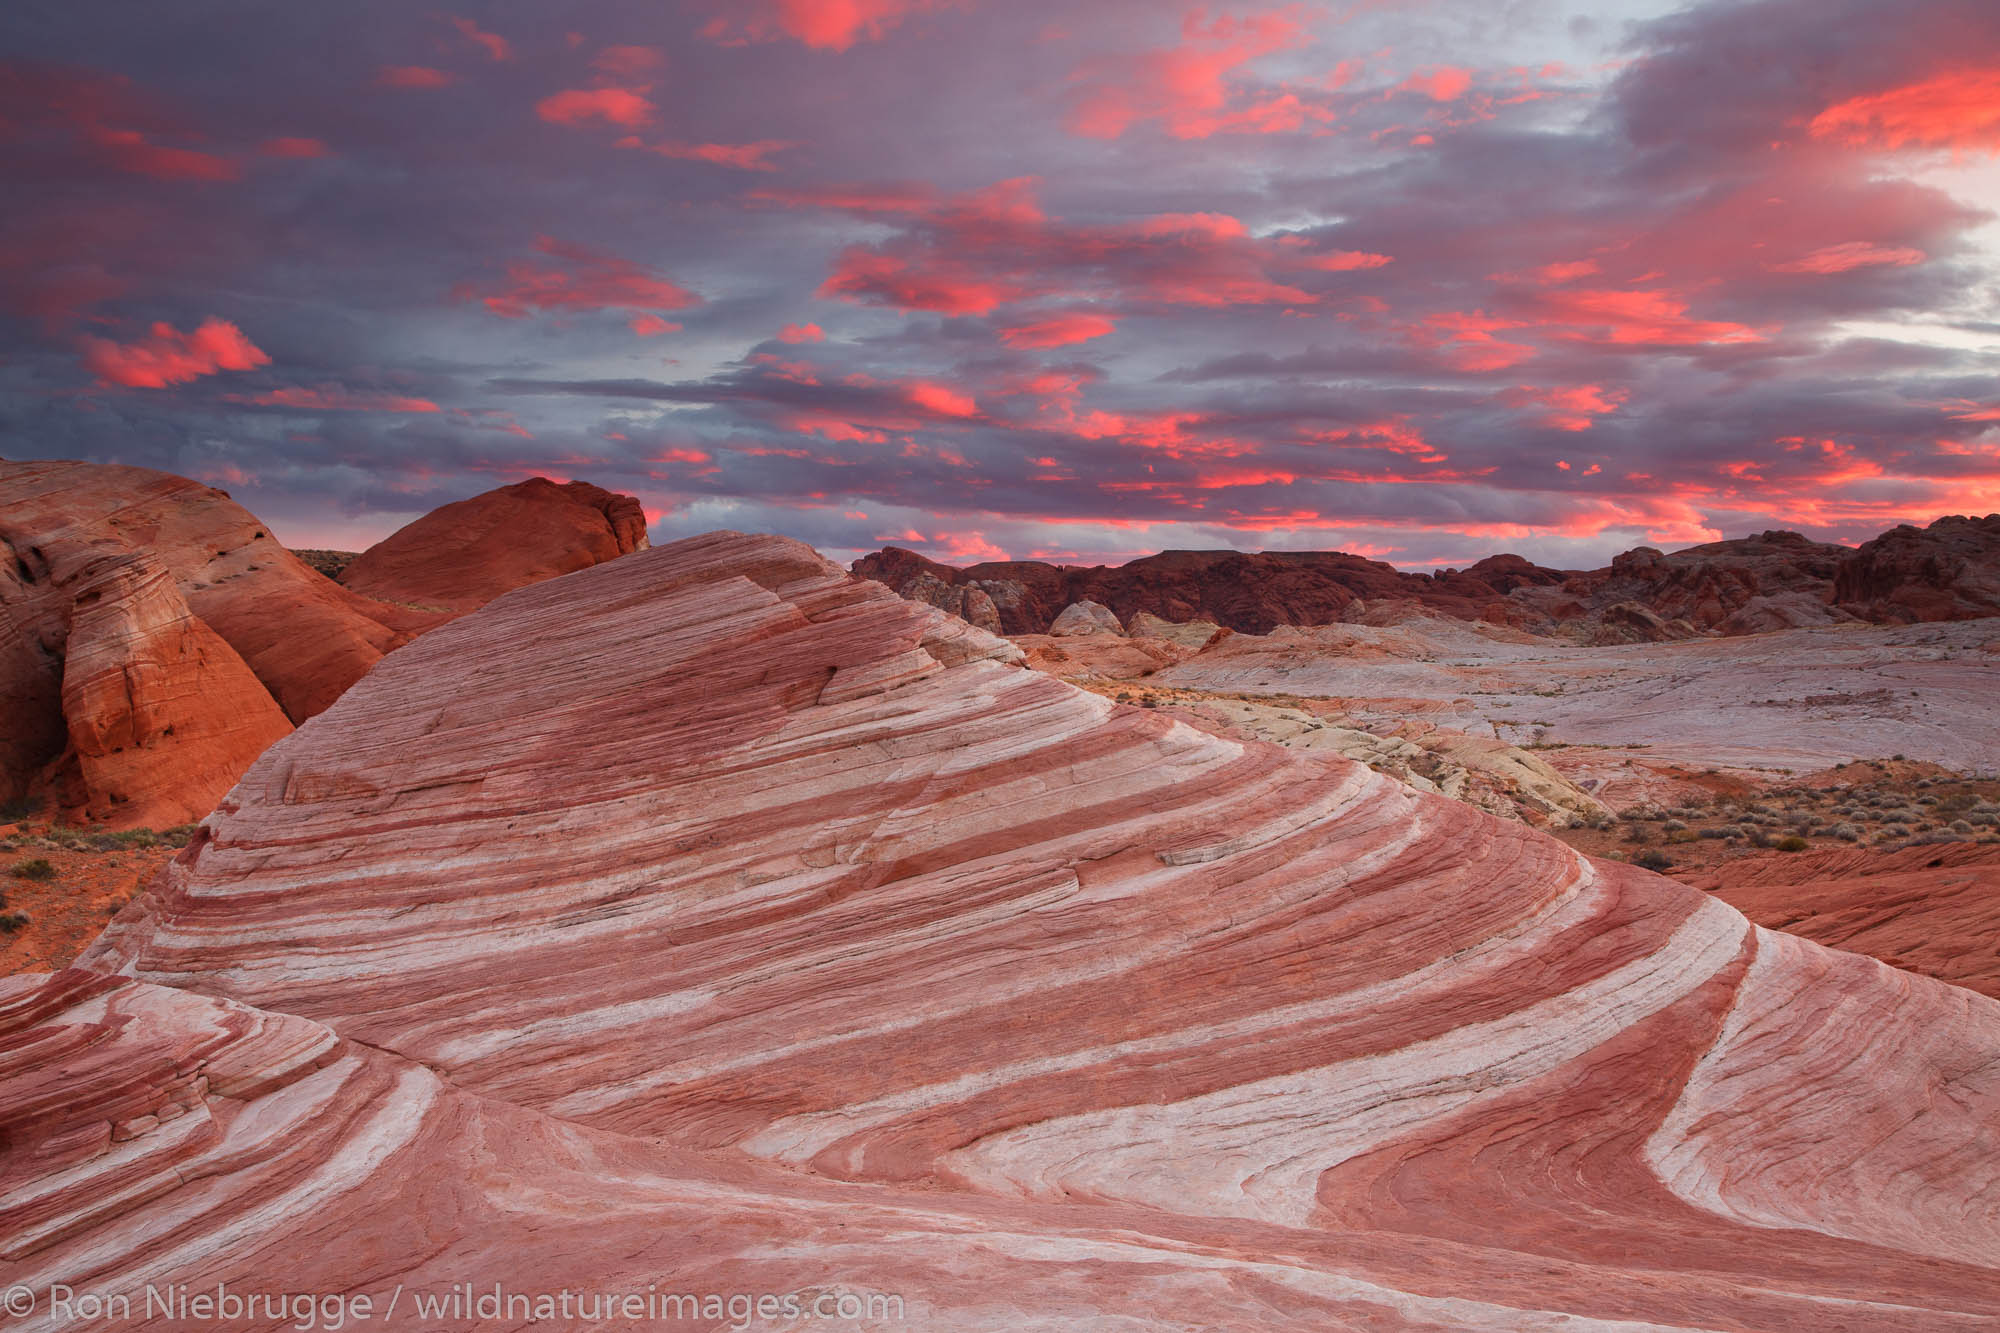 Sunset at Fire Wave, Valley of Fire State Park, not far from Las Vegas, Nevada.